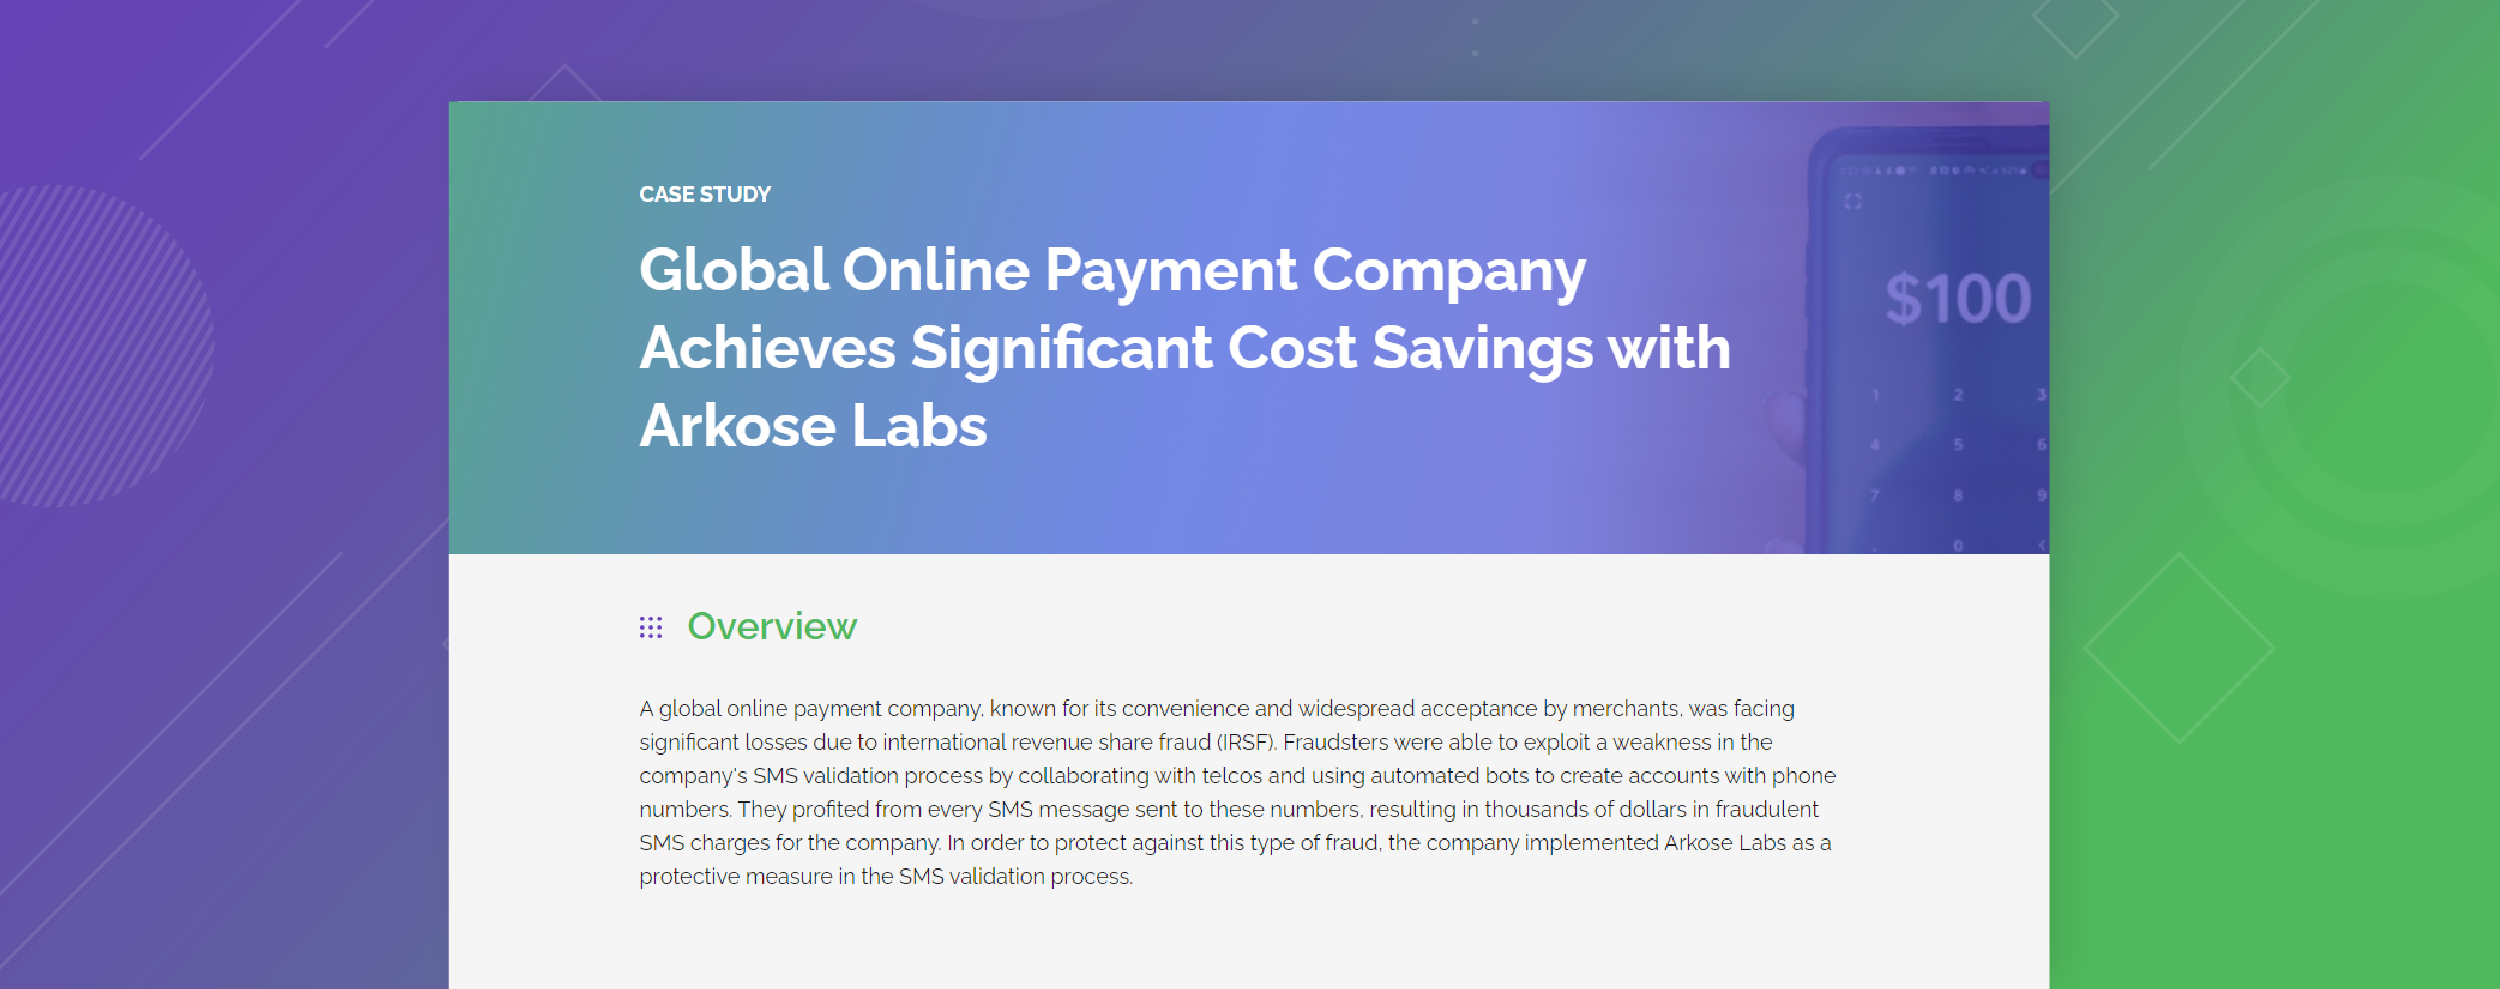 Global Online Payment Company Achieves Significant Cost Savings with Arkose Labs